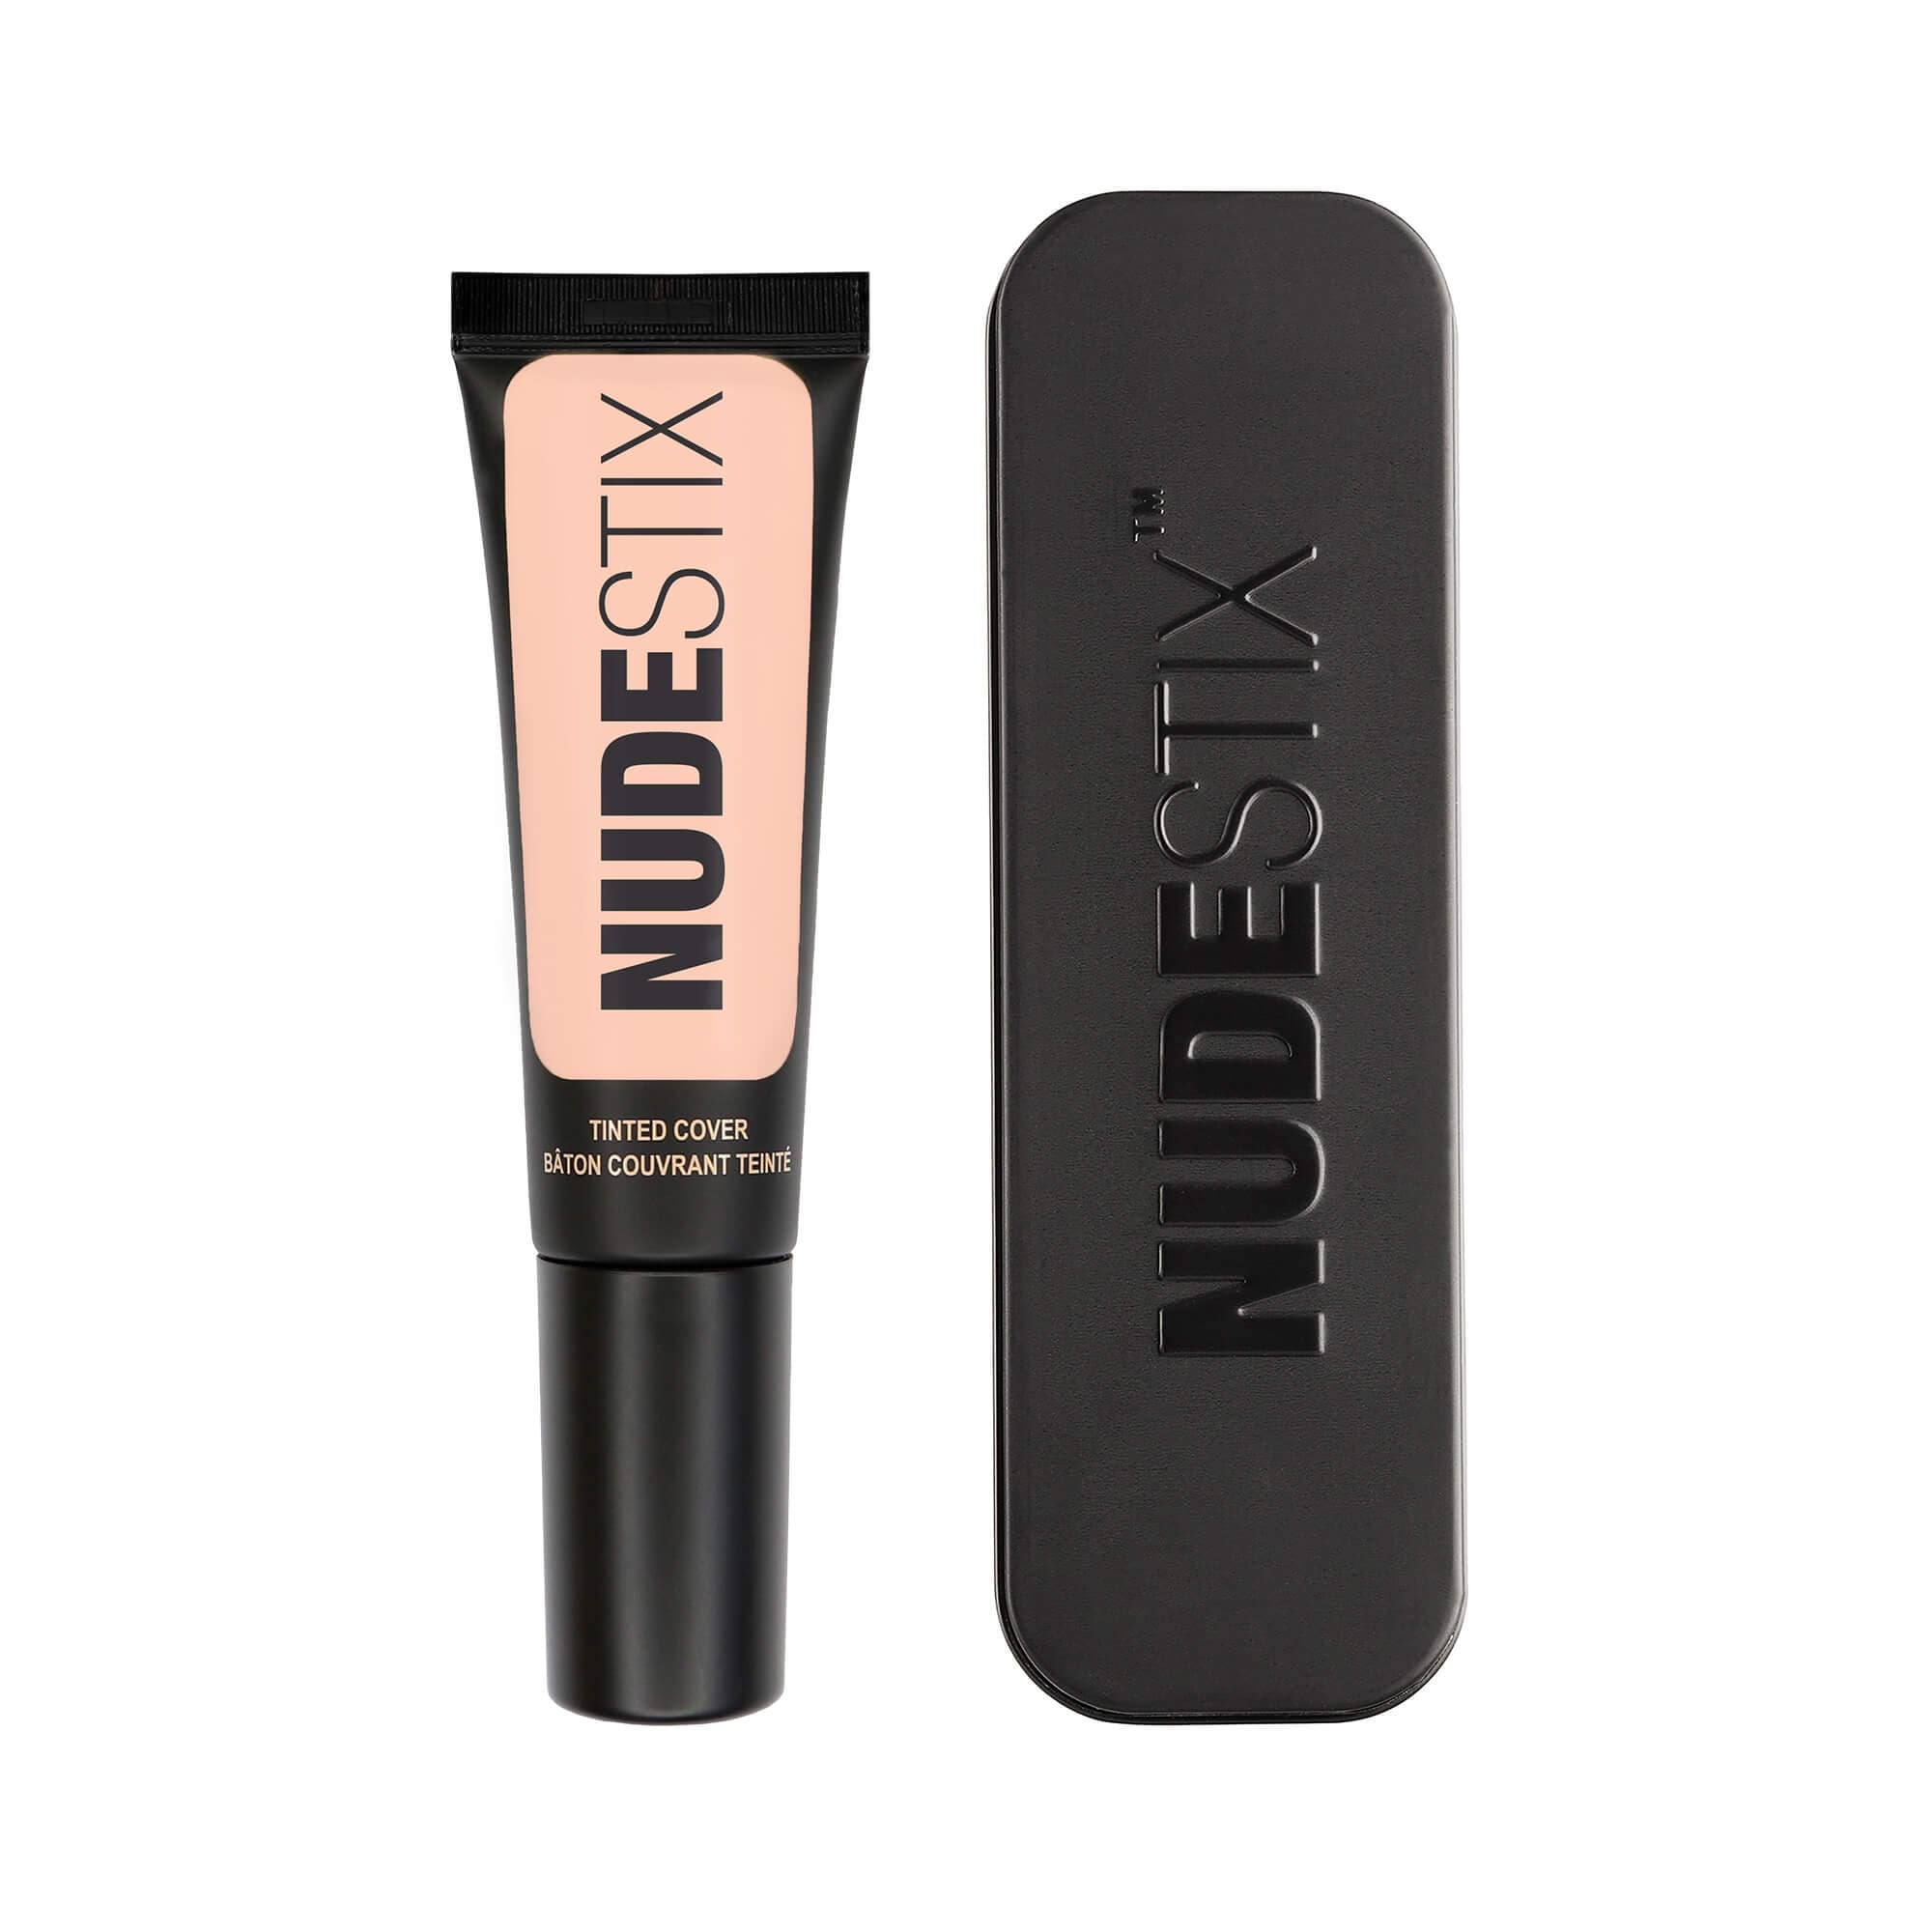 Tinted Cover Liquid Foundation in shade Nude 1.5 and Nudestix can